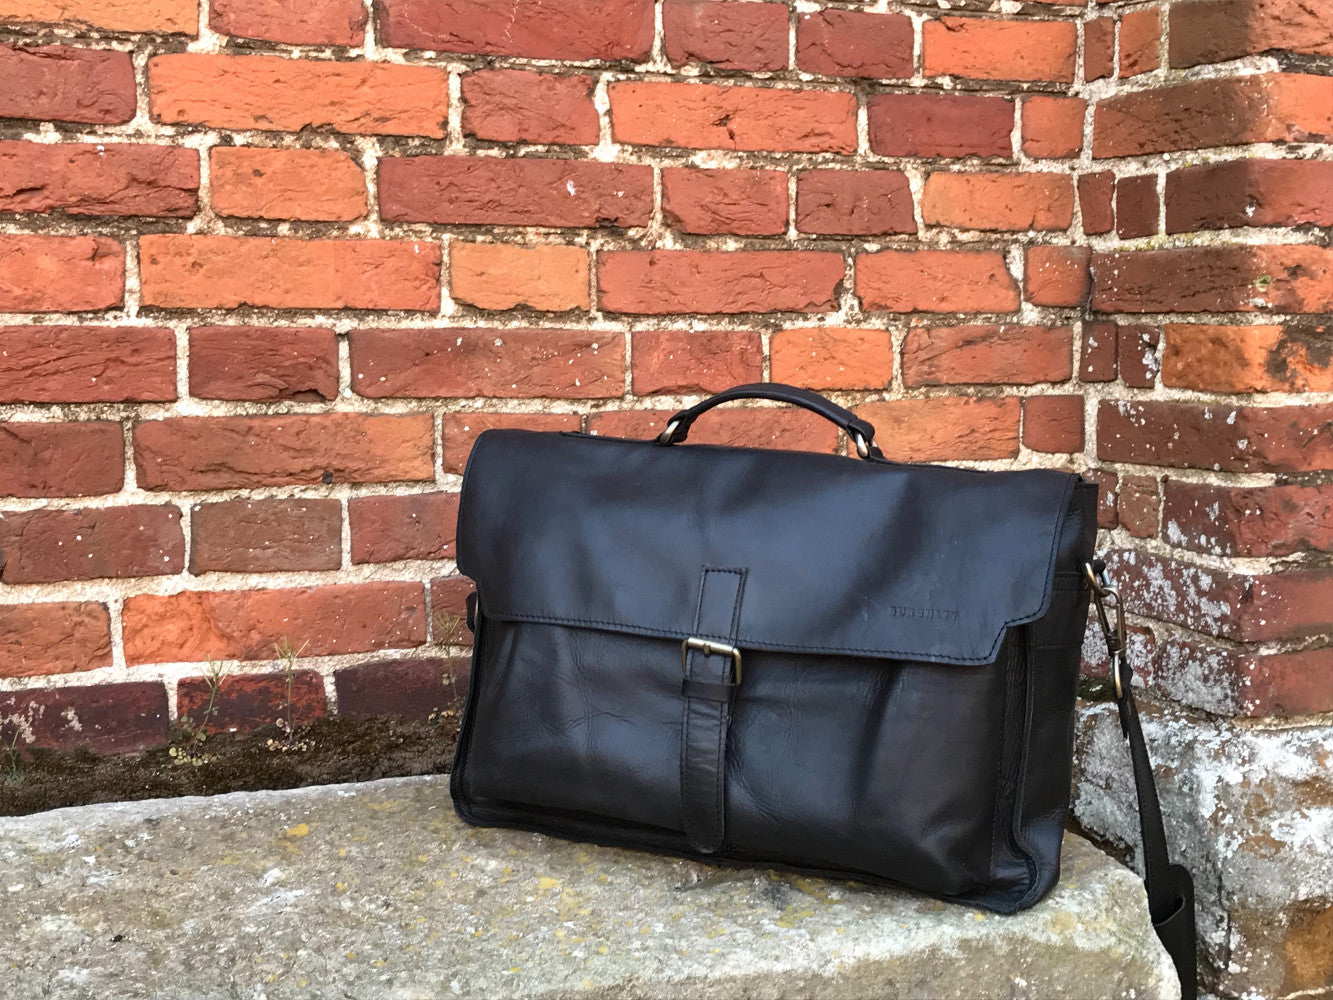 The Dorrington Briefcase. A classic 30's styled leather briefcase by Burghley Bags. A handmade leather vintage work bag, with enough space for 15" laptops. Comes with an adjustable and detachable shoulder strap. Shown in elegant black.